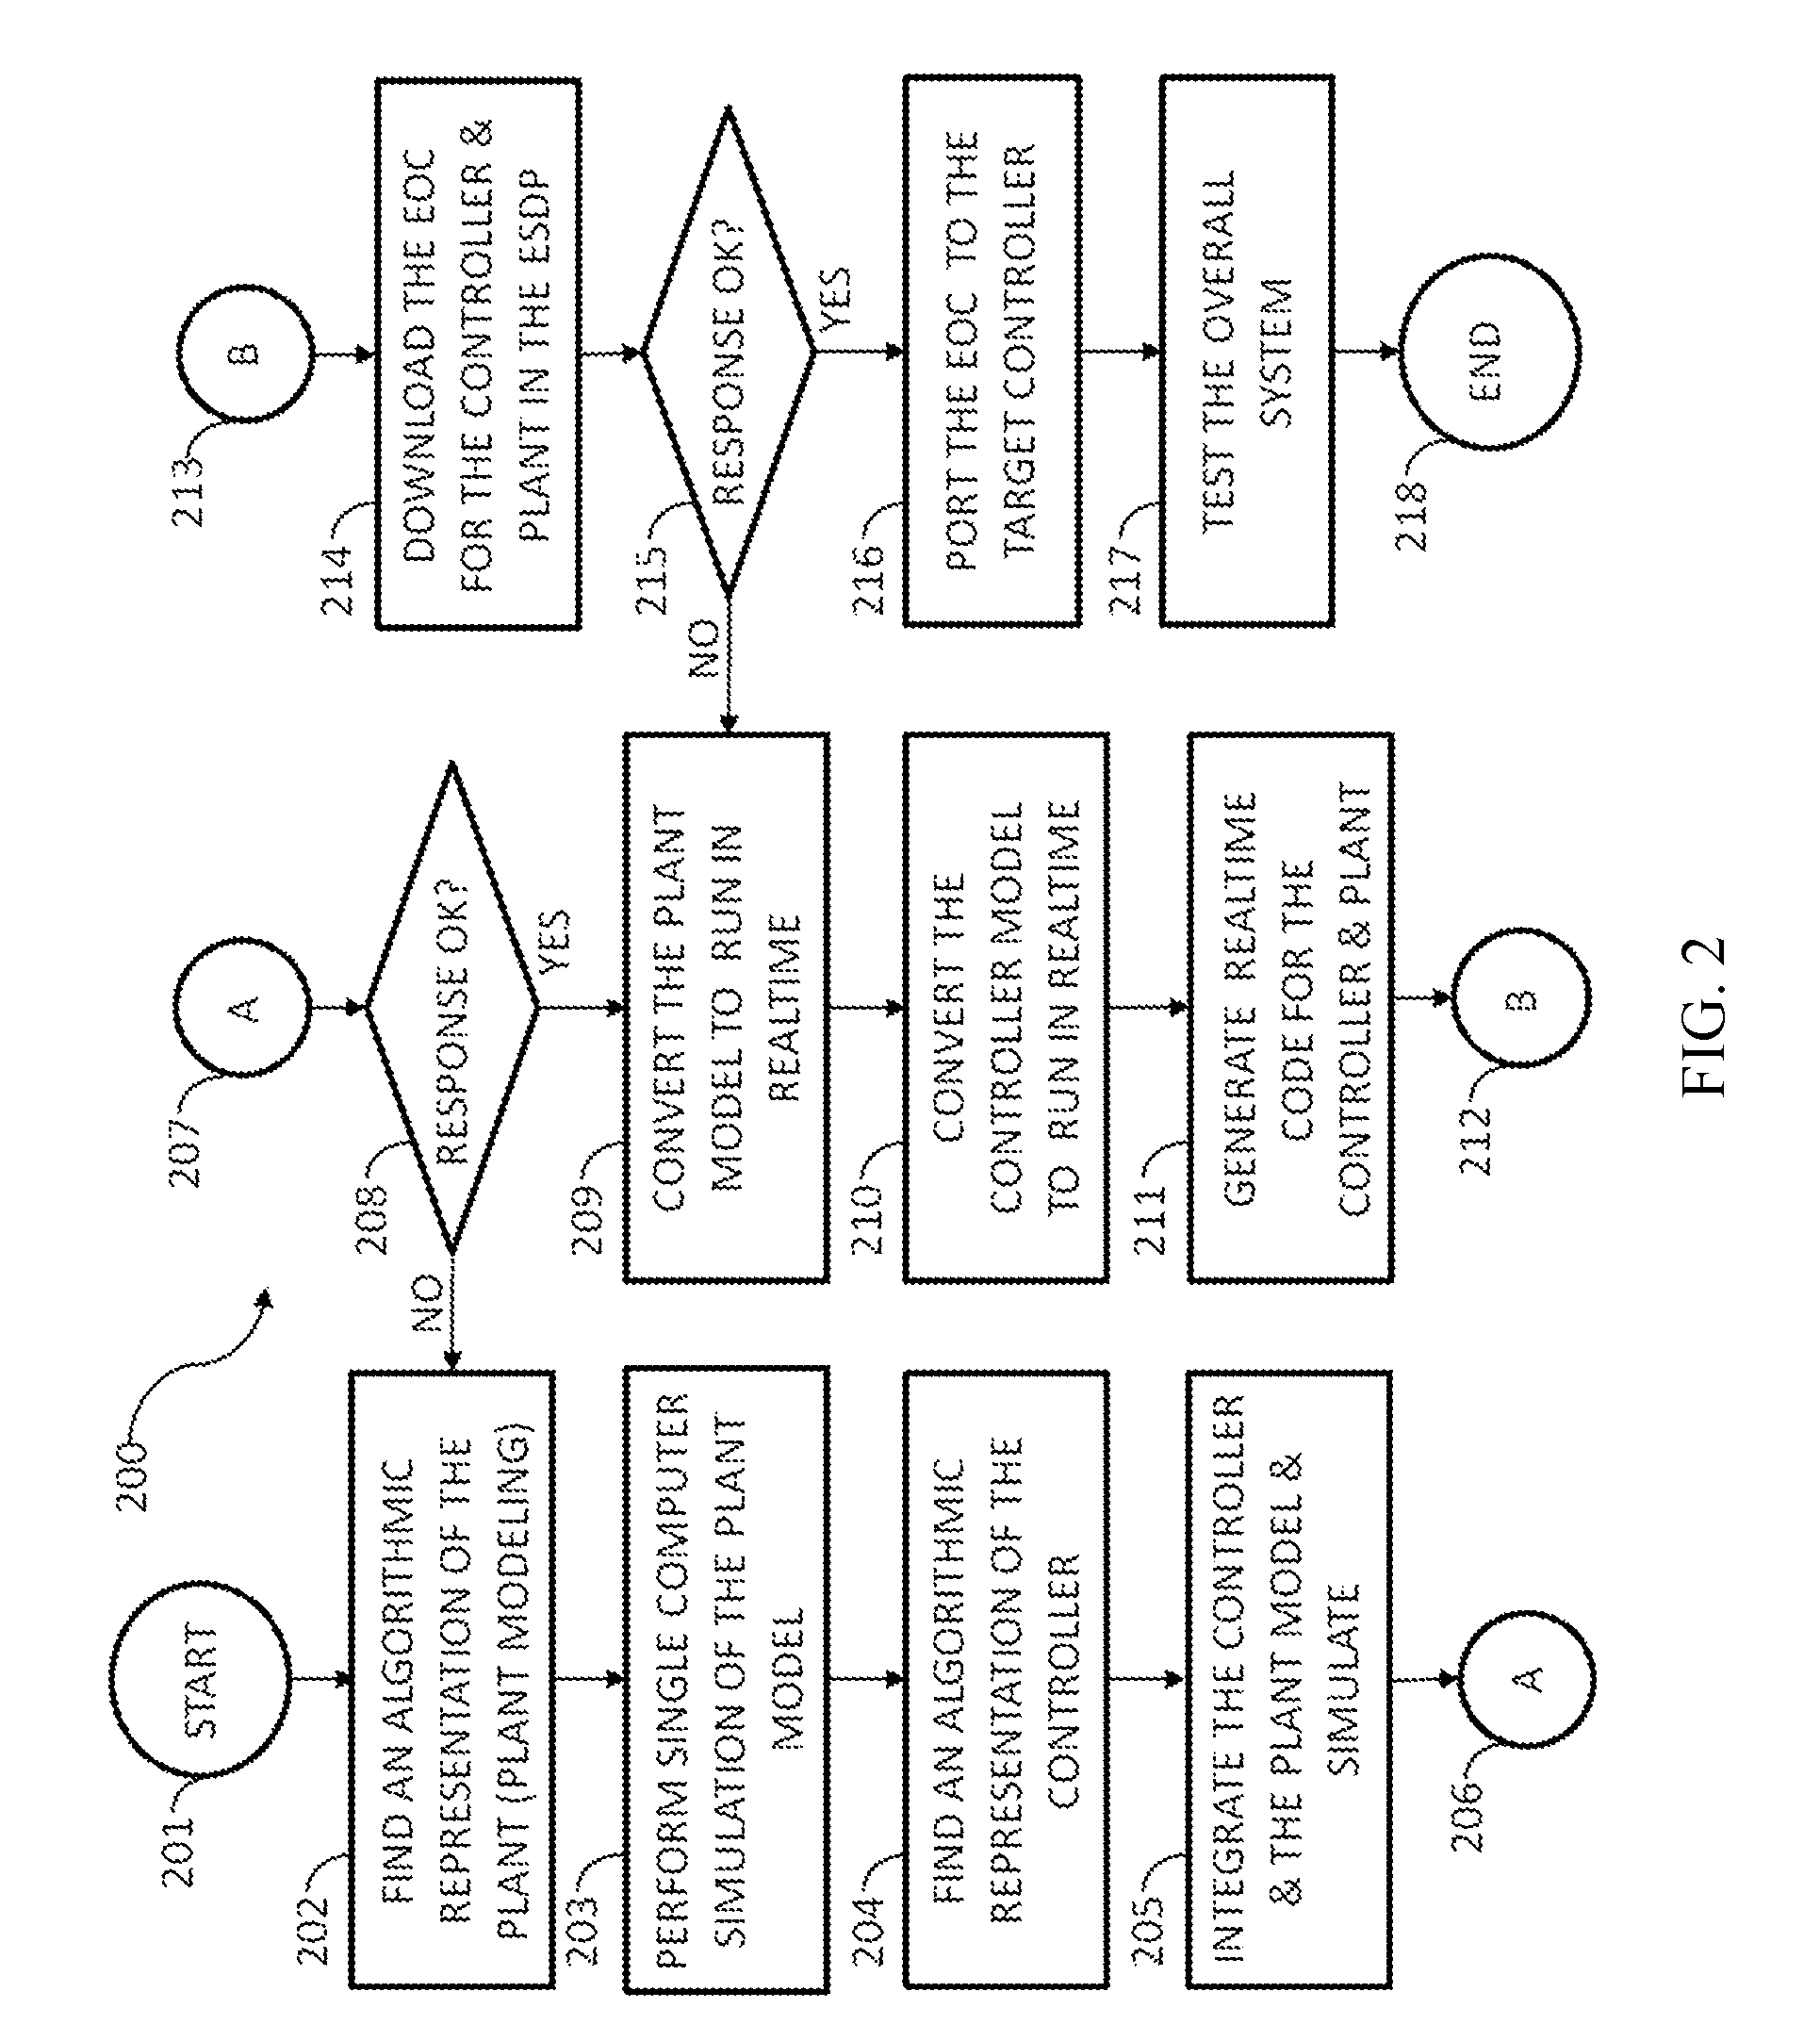 Apparatus for developing embedded software and a process for making the same